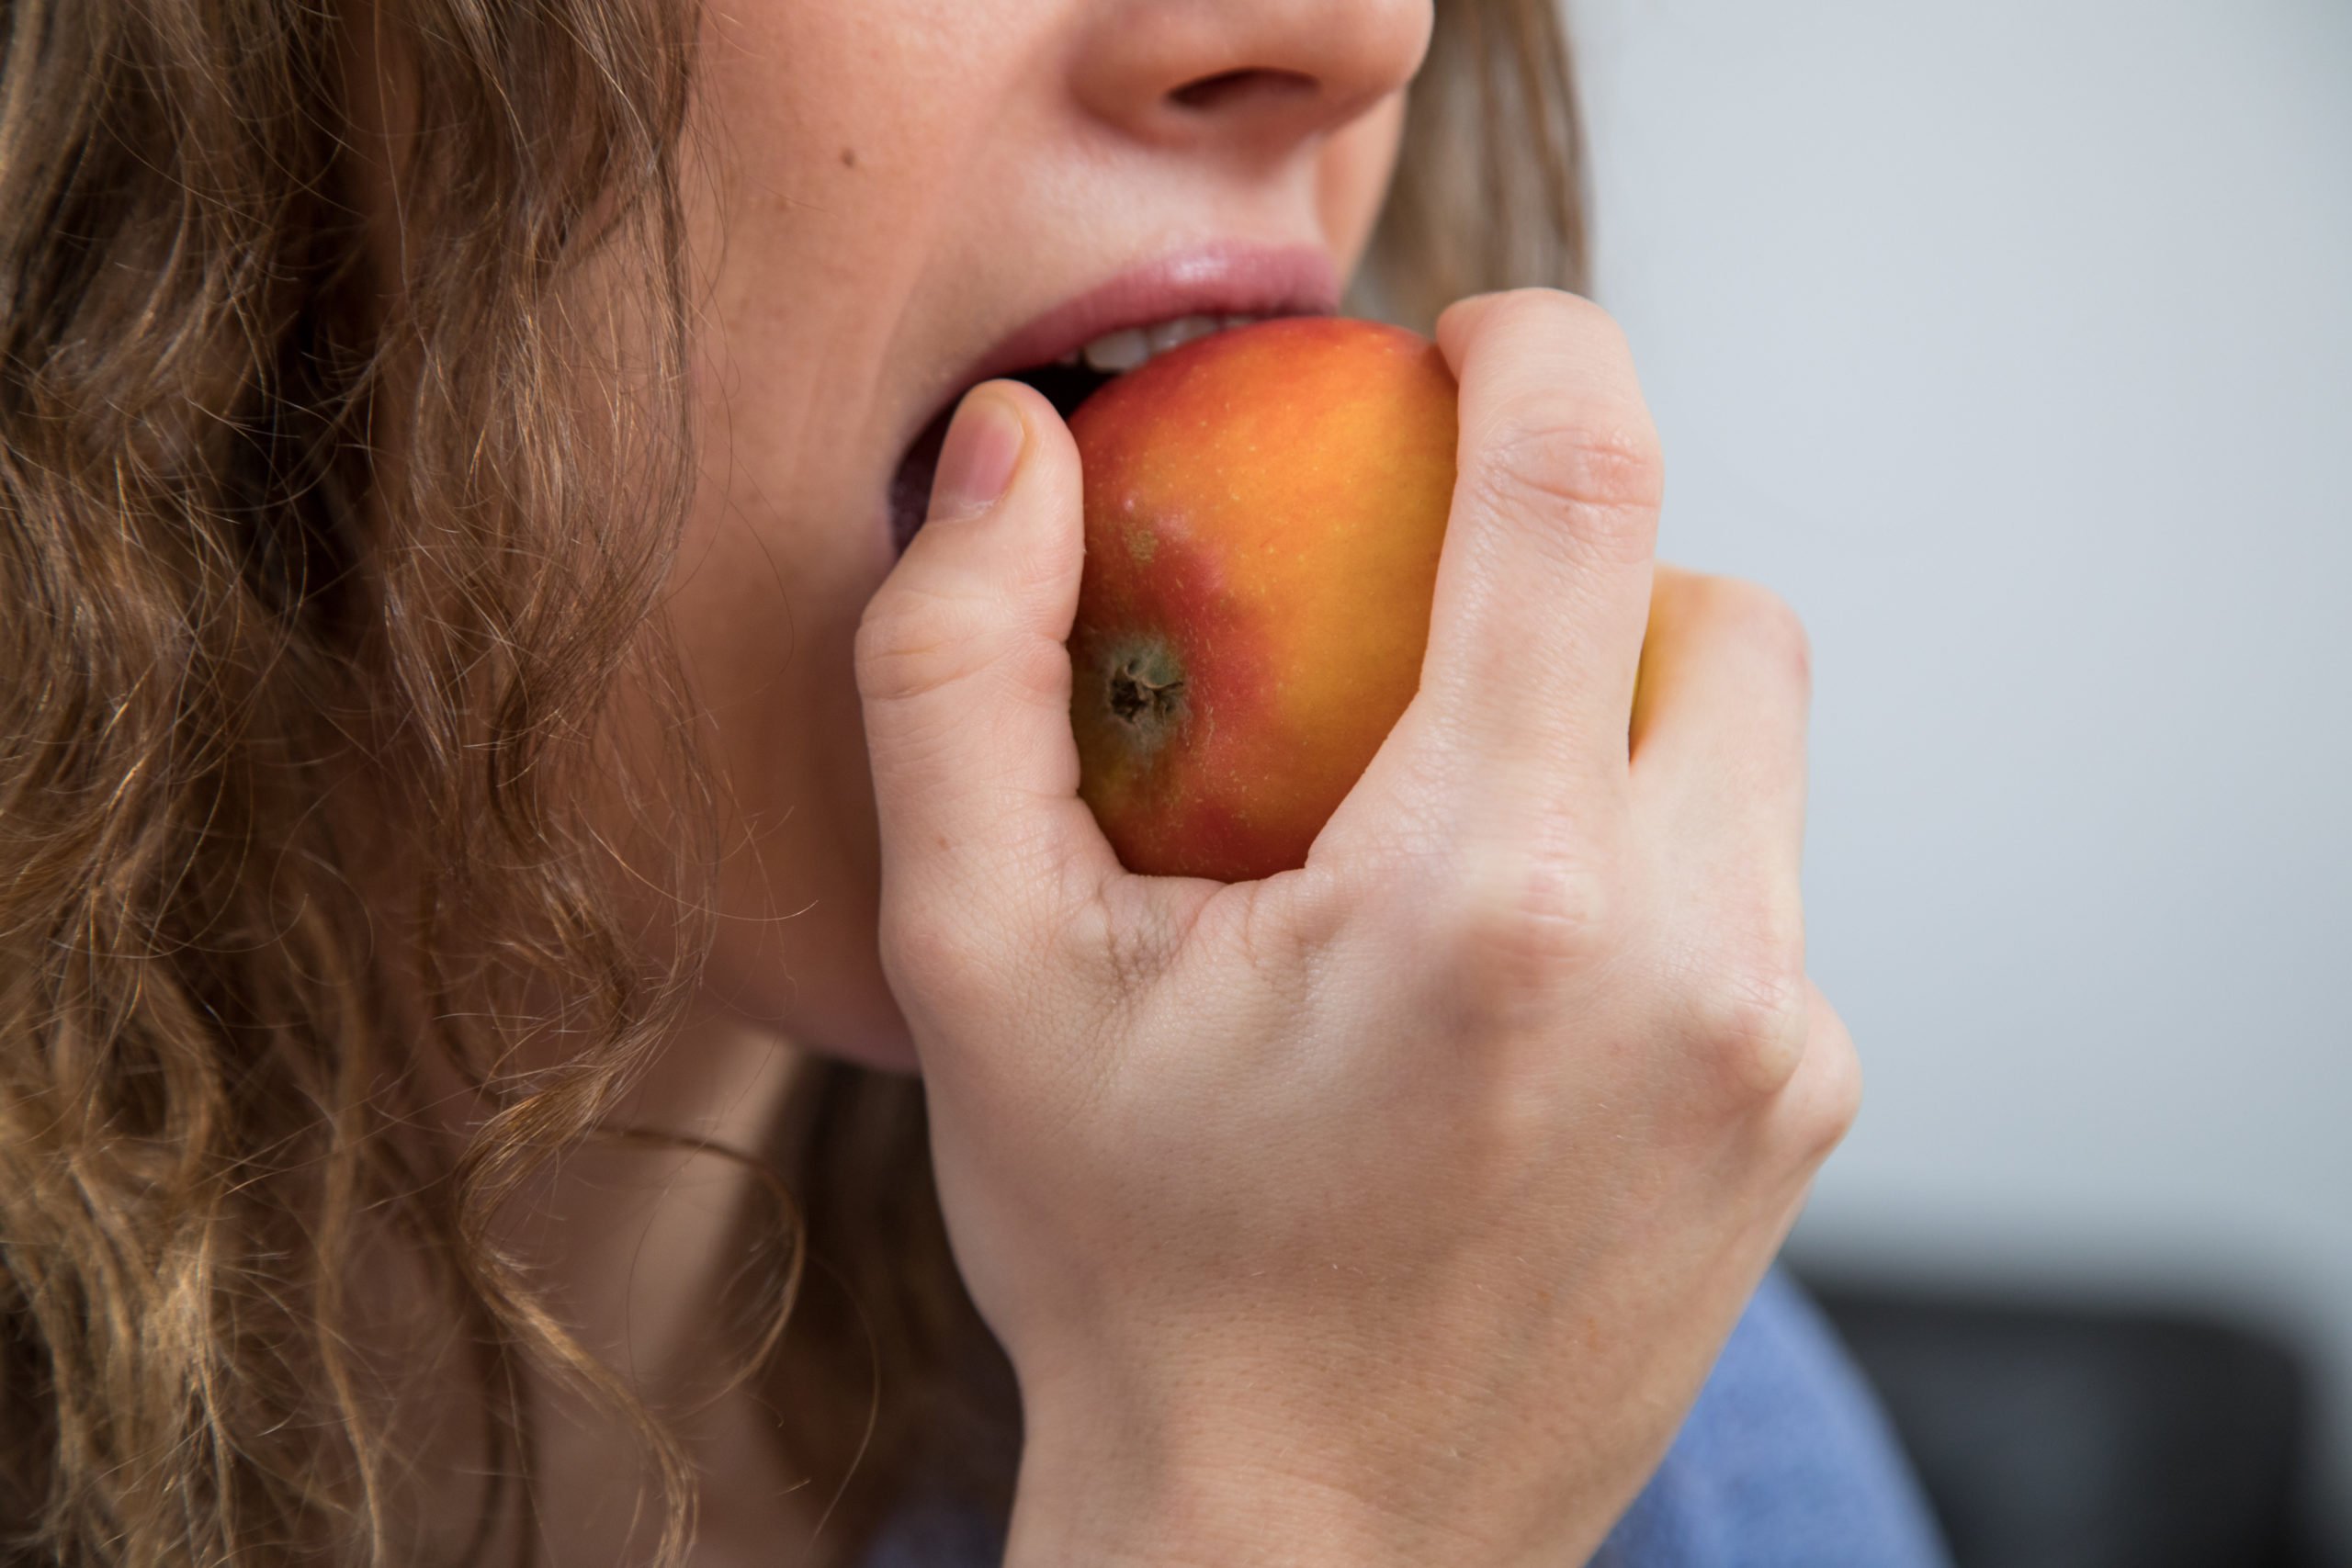 A woman bites into an apple.